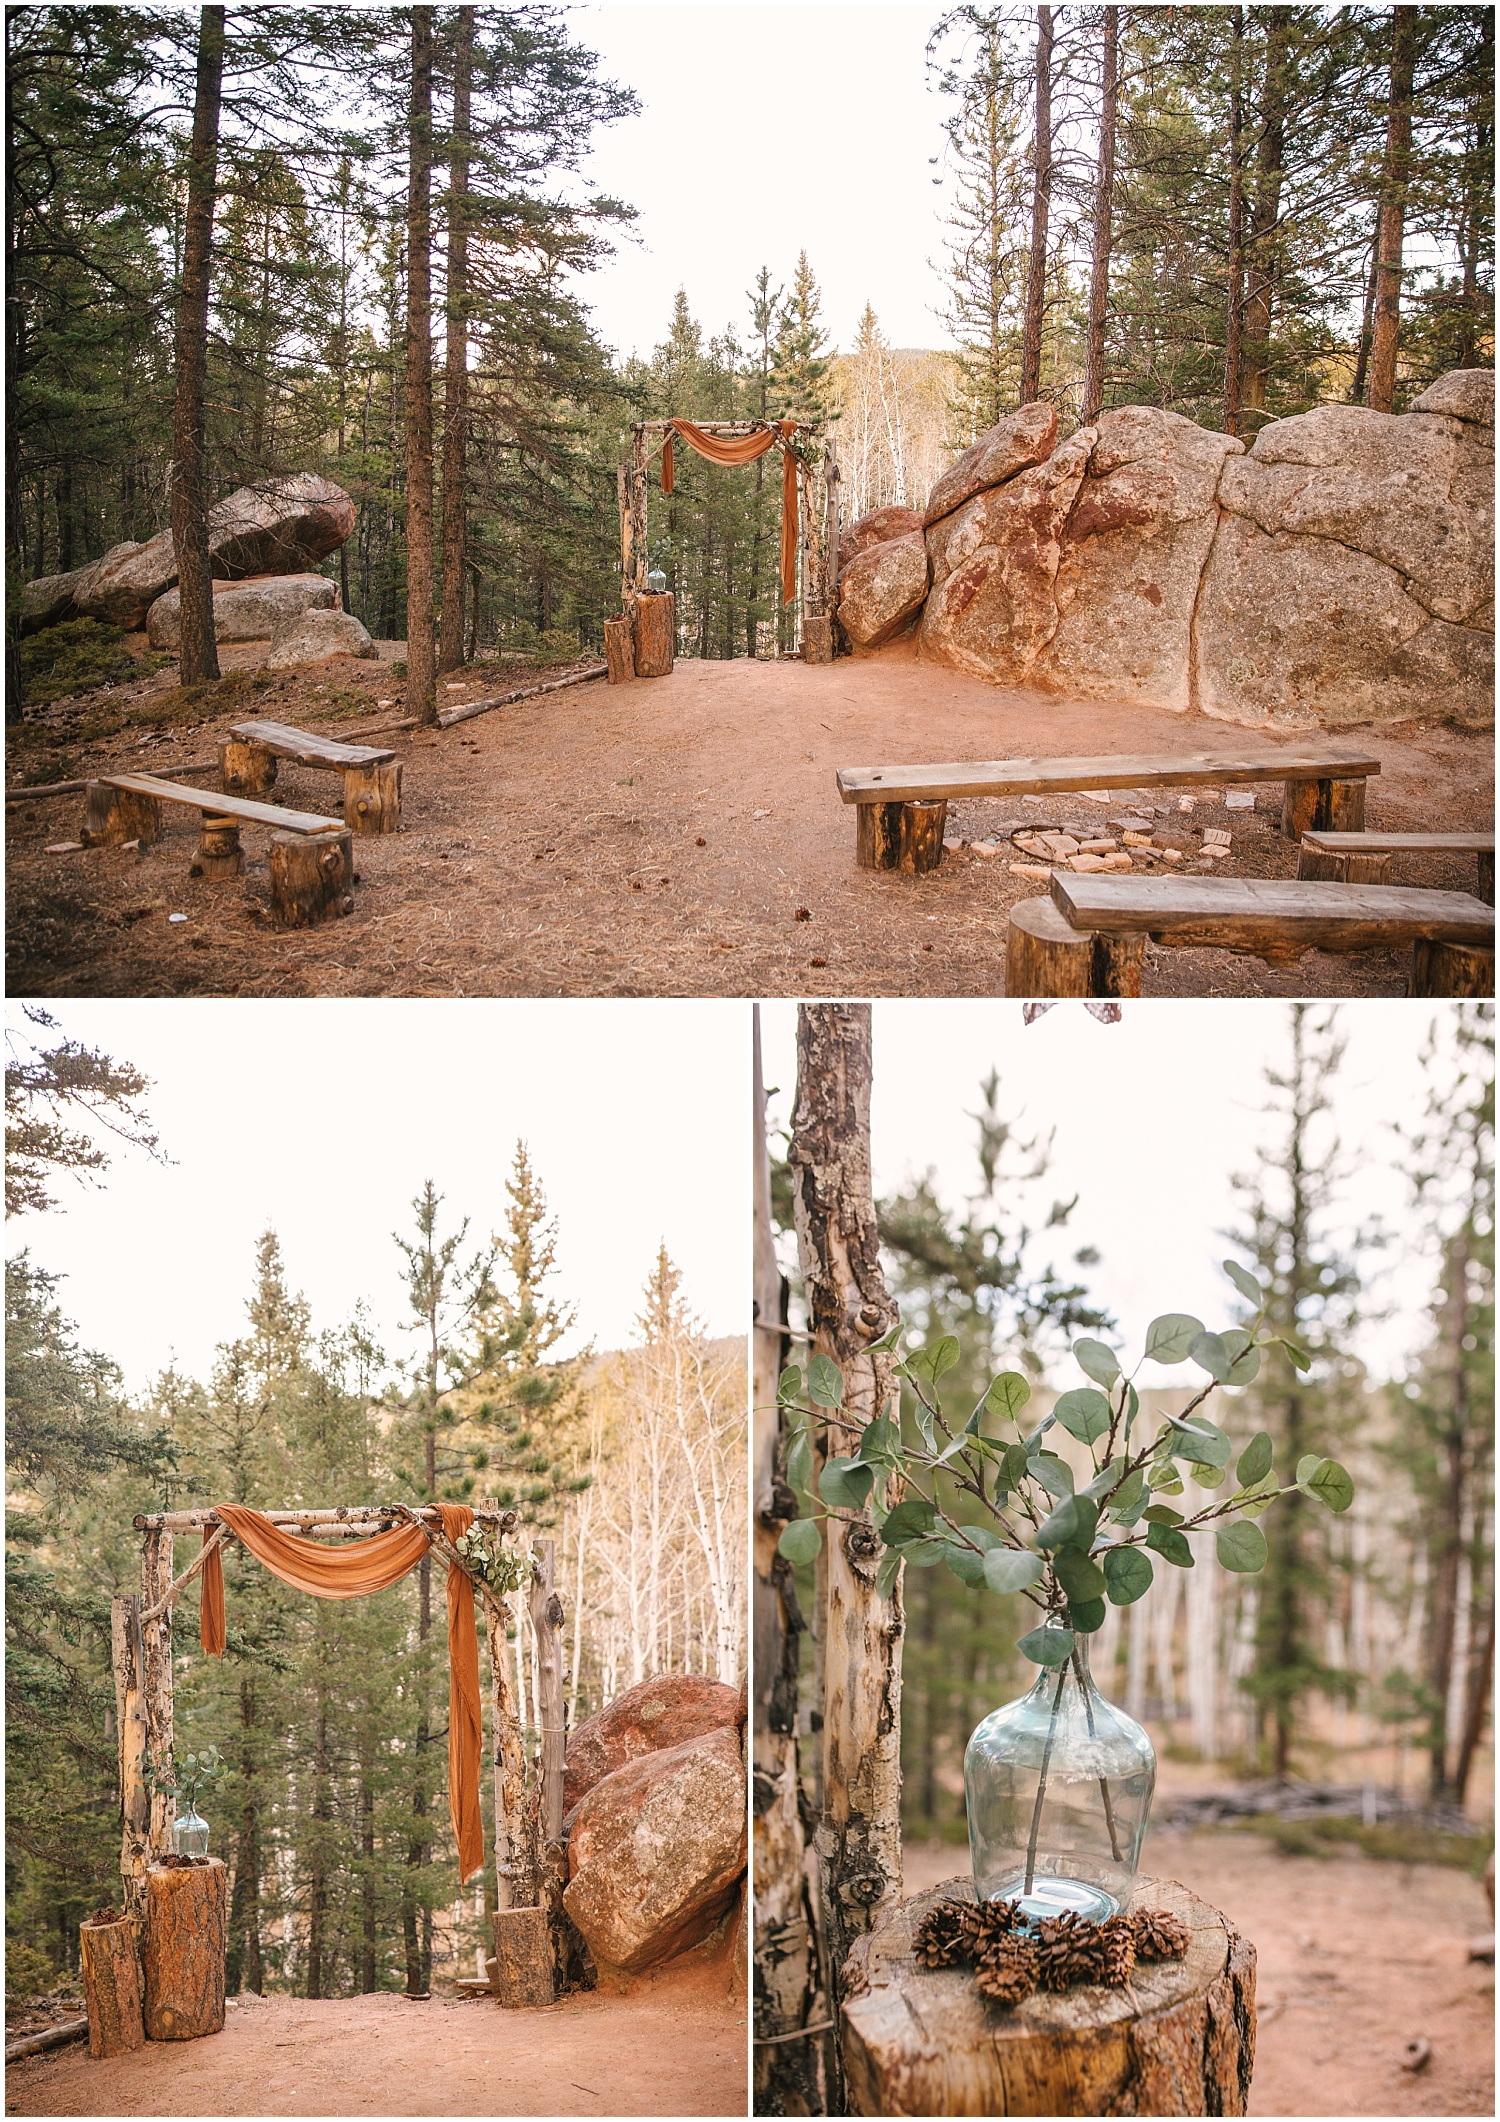 Woodland Park intimate wedding ceremony in the mountains